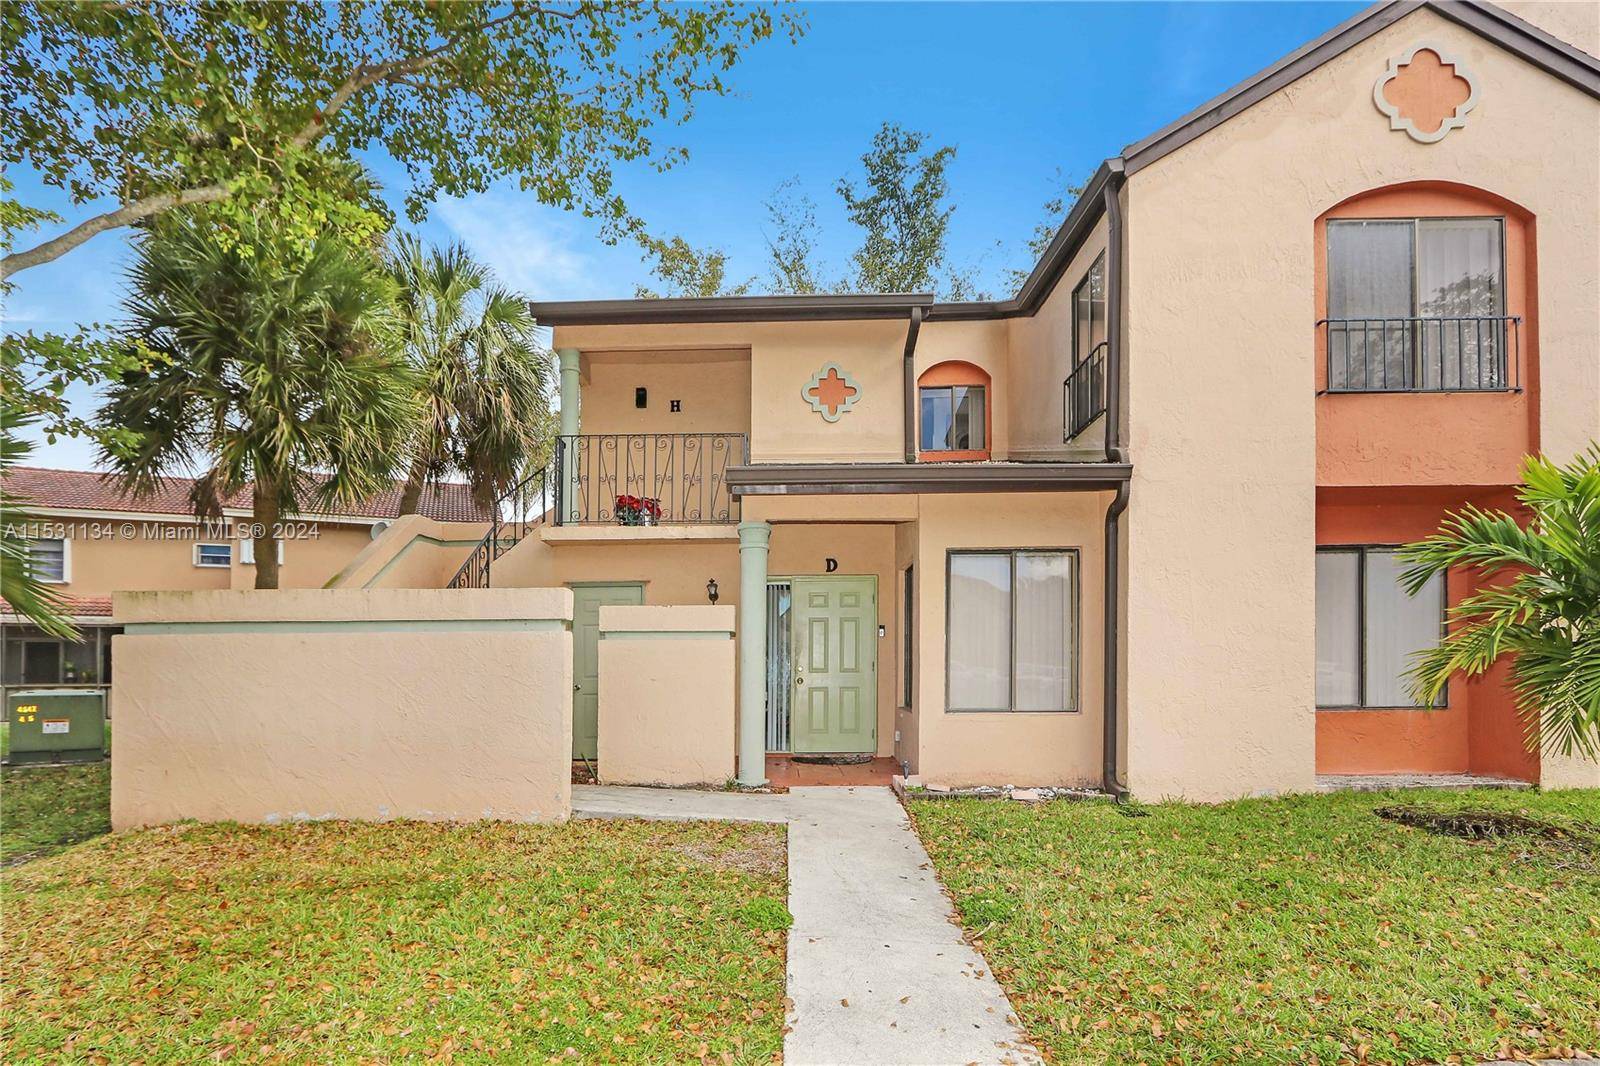 Nice corner condo unit, first floor, great spaces with a huge balcony, 3 bedrooms and 2 full bathrooms, all tile and laminated floors in the bedrooms, updated kitchen, washer and ...